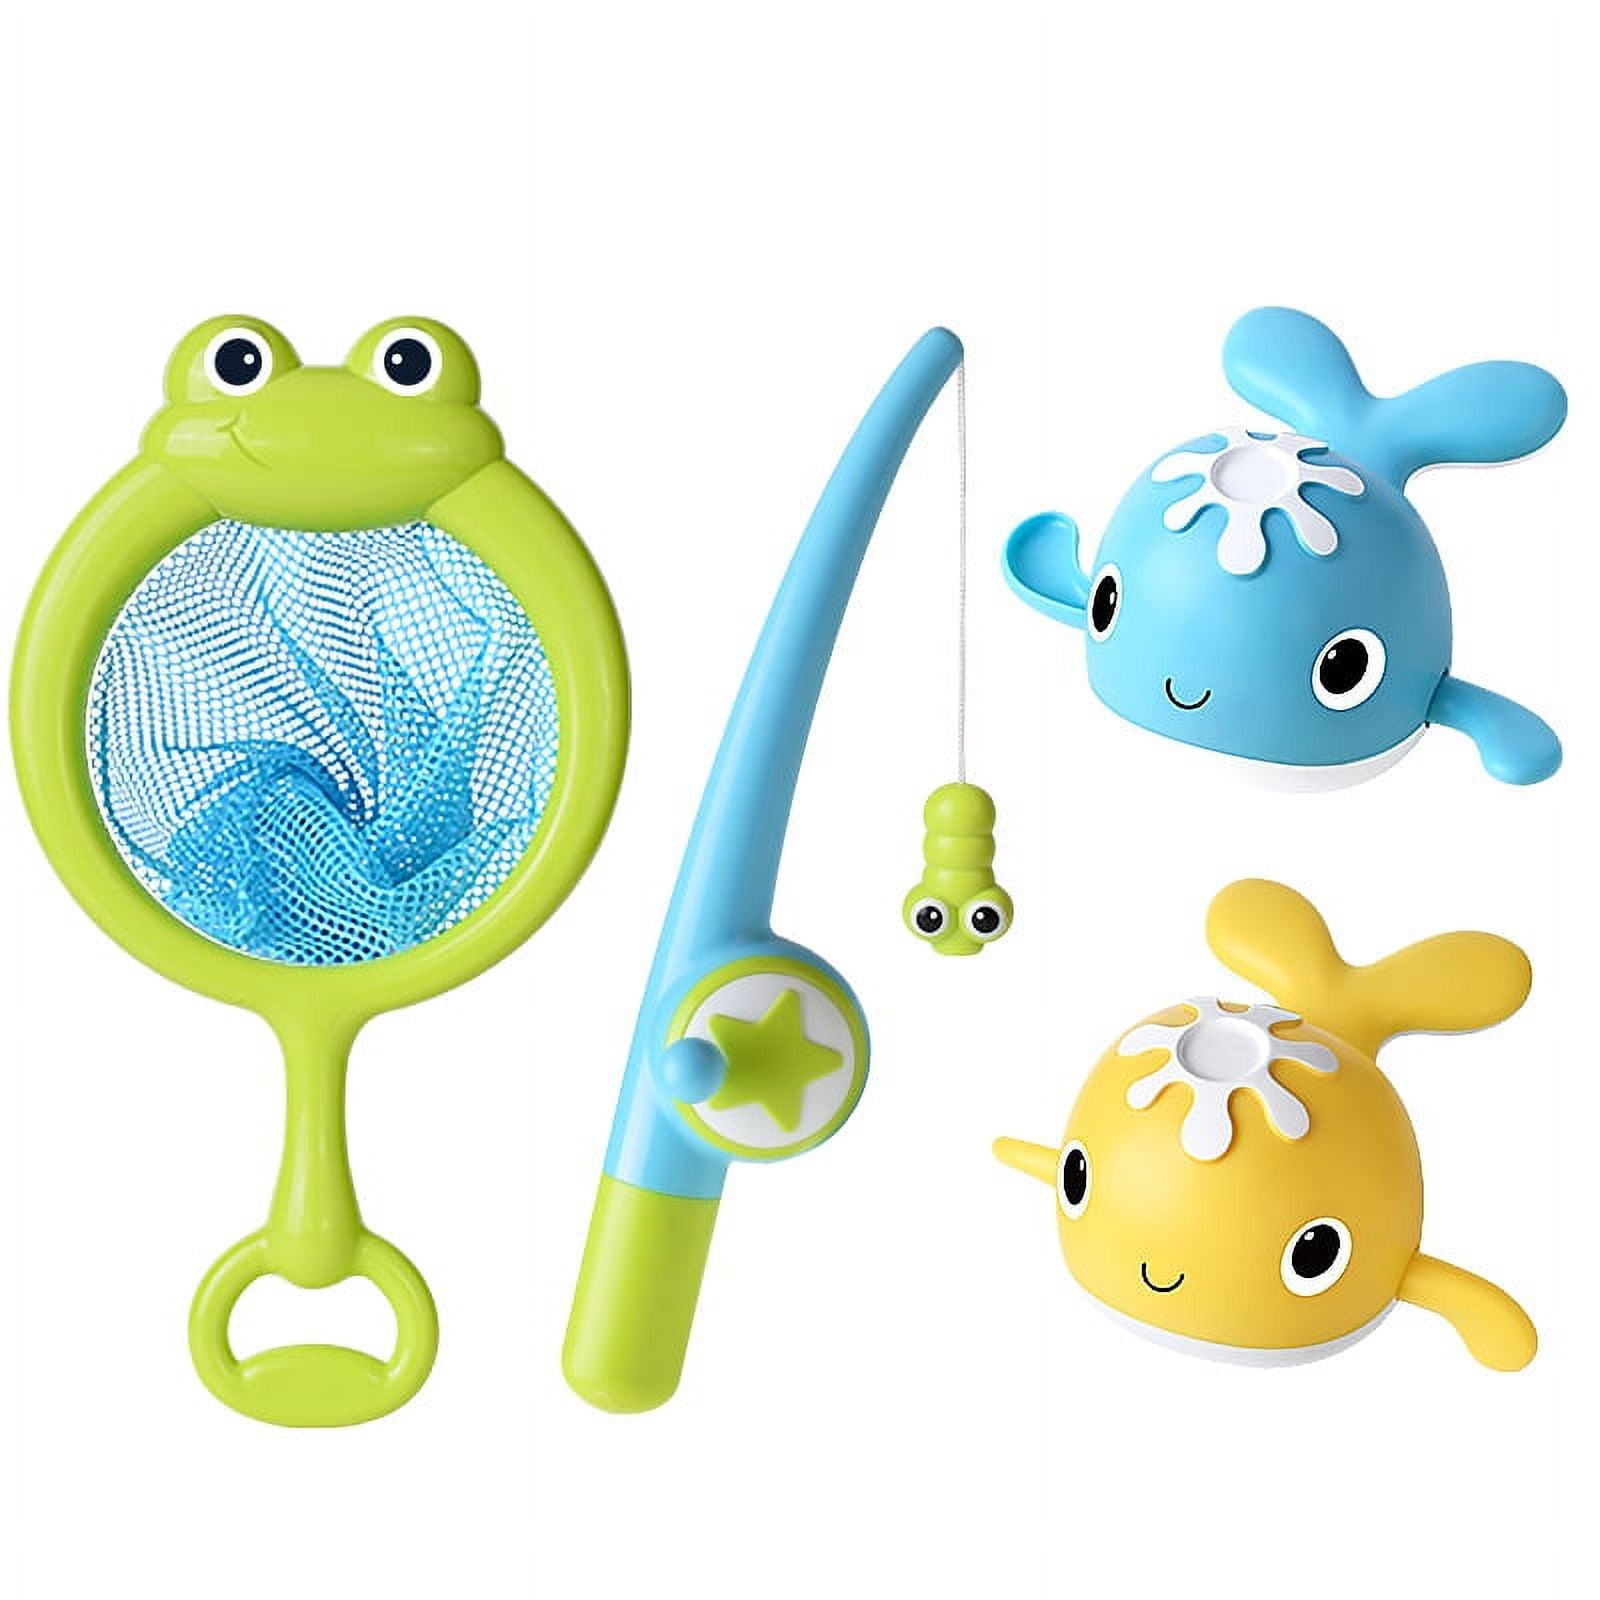 4Pcs/Set Magnet Baby Bath Fishing Toys - Wind Up Swimming Whale Bathtub Toy  Fishing Game, Water Bath Play Set with Fishing Rod and Net for 3 4 5 6 Years  Old Toddlers 